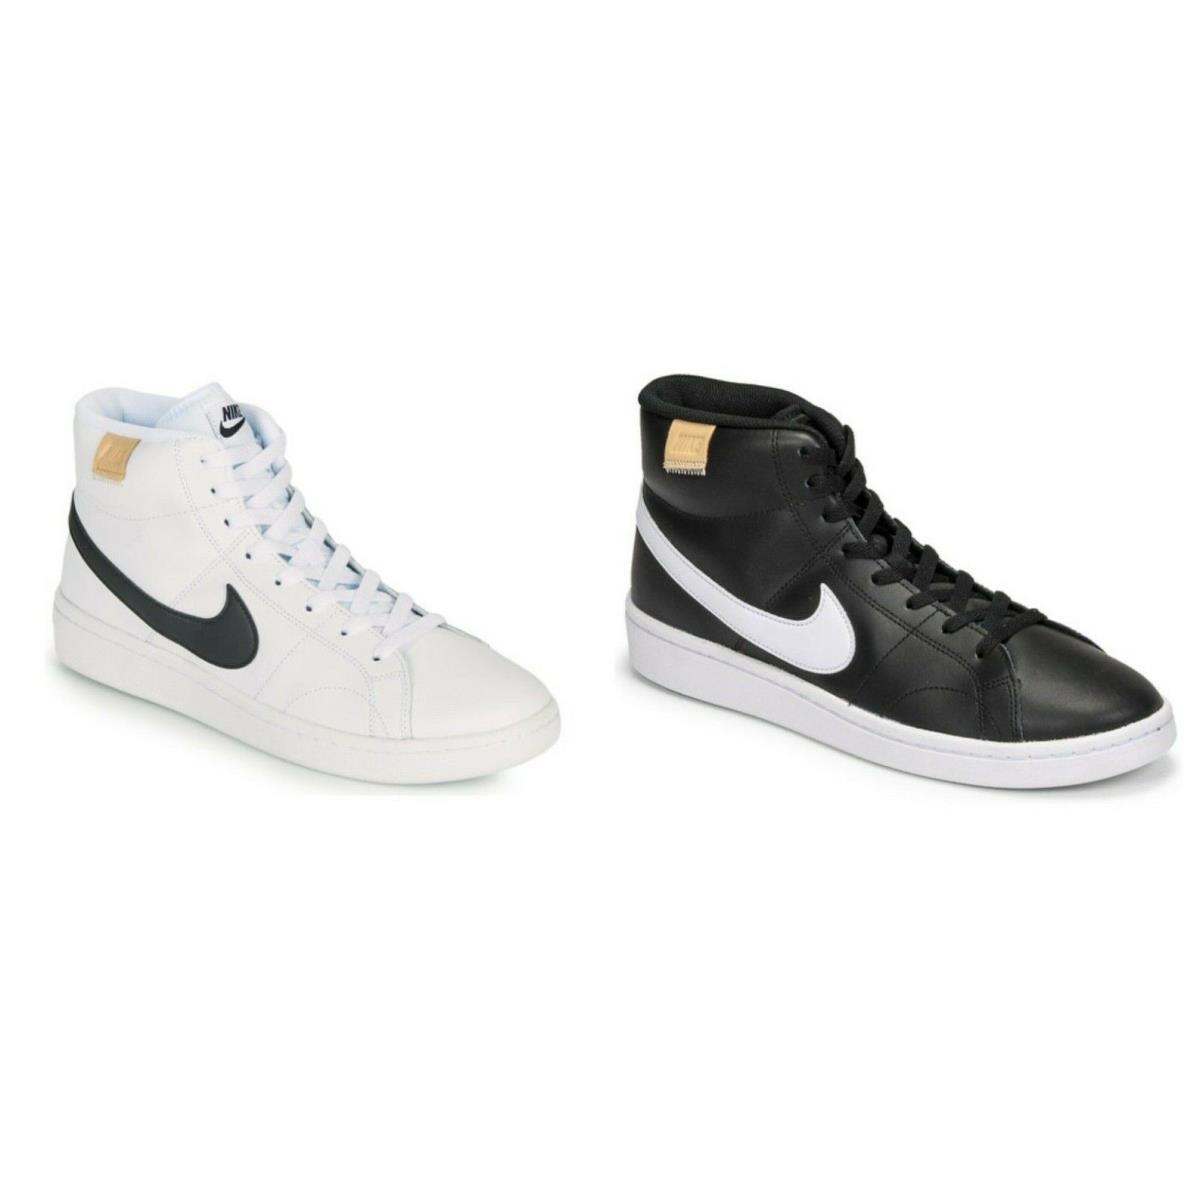 Nike Court Royale 2 Mid Top Men`s Sneakers Casual Retro 80`s Shoes - Black